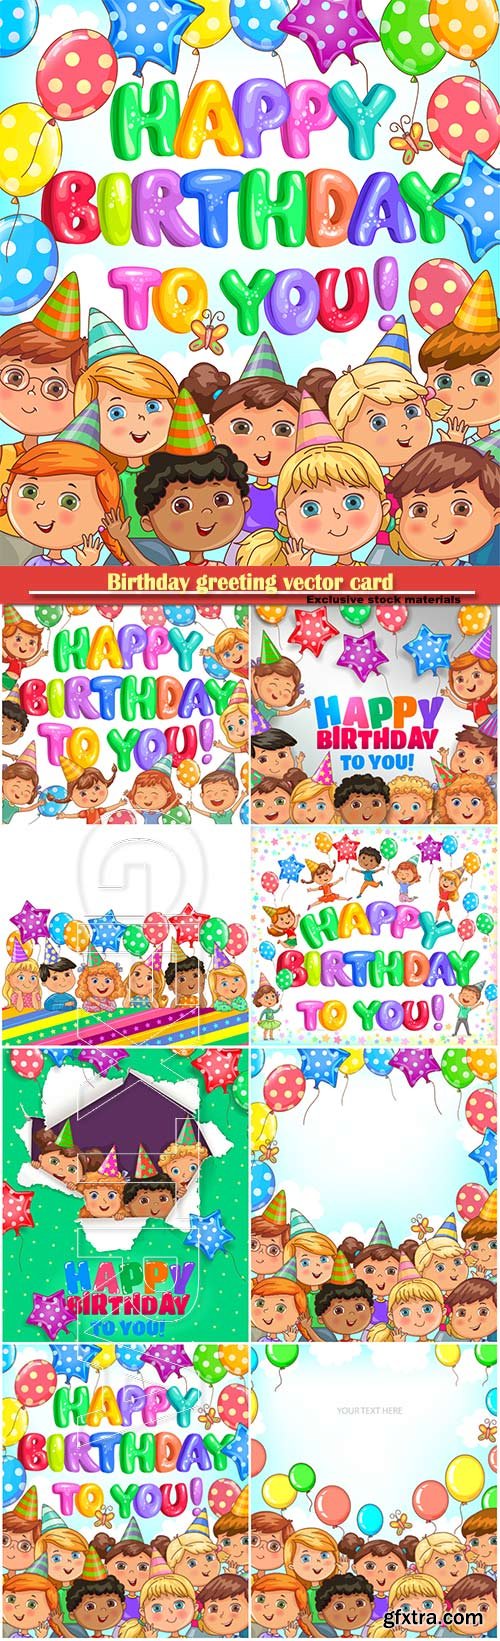 Birthday greeting vector card, banner with balloons and funny kids